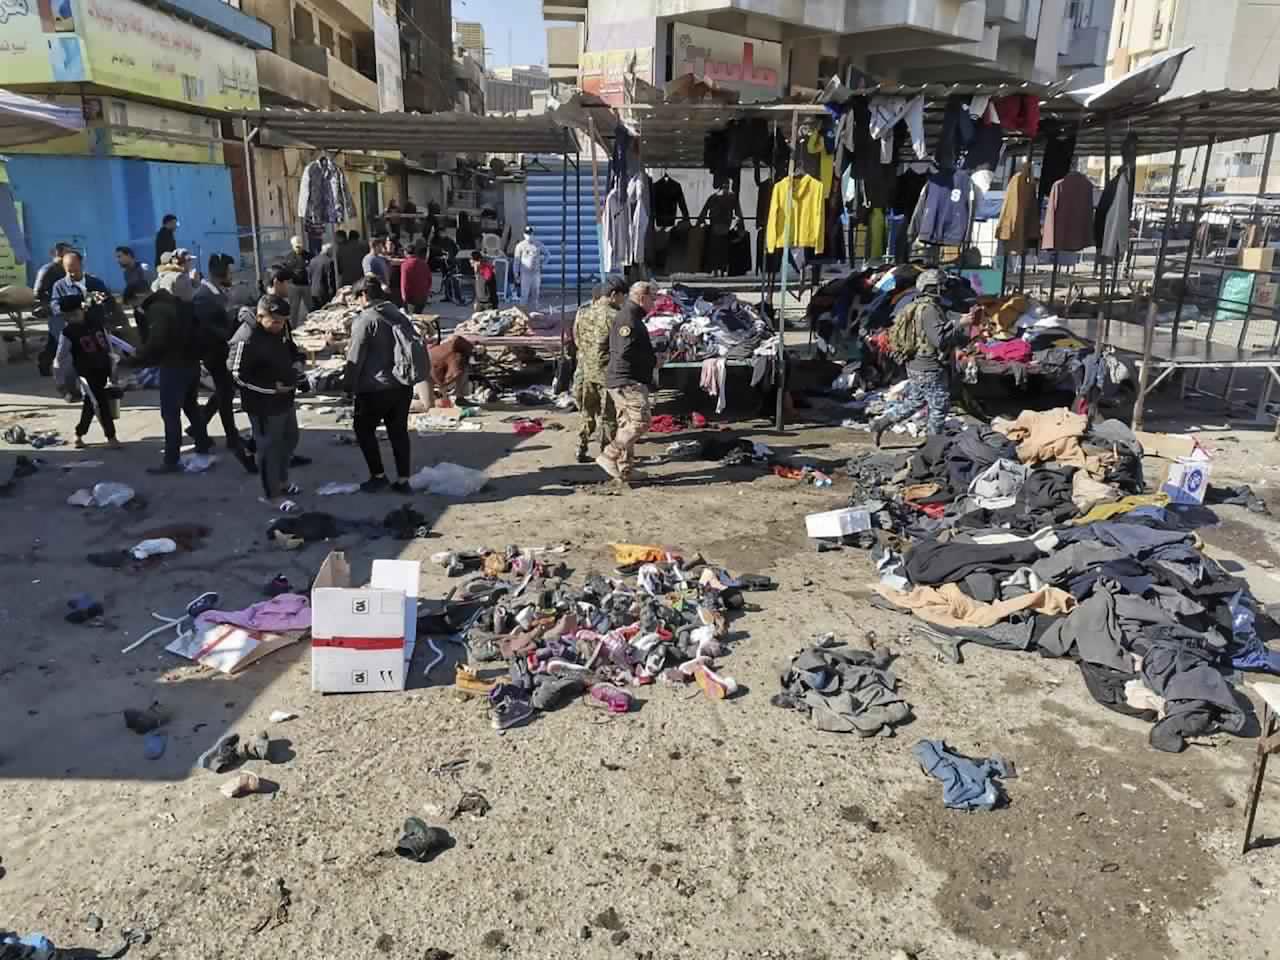 People and security forces gather at the site of a deadly bomb attack in a market selling used clothes, Iraq, Jan 21. Twin suicide bombings hit Iraq's capital Thursday killing and wounding civilians. Photo: AP